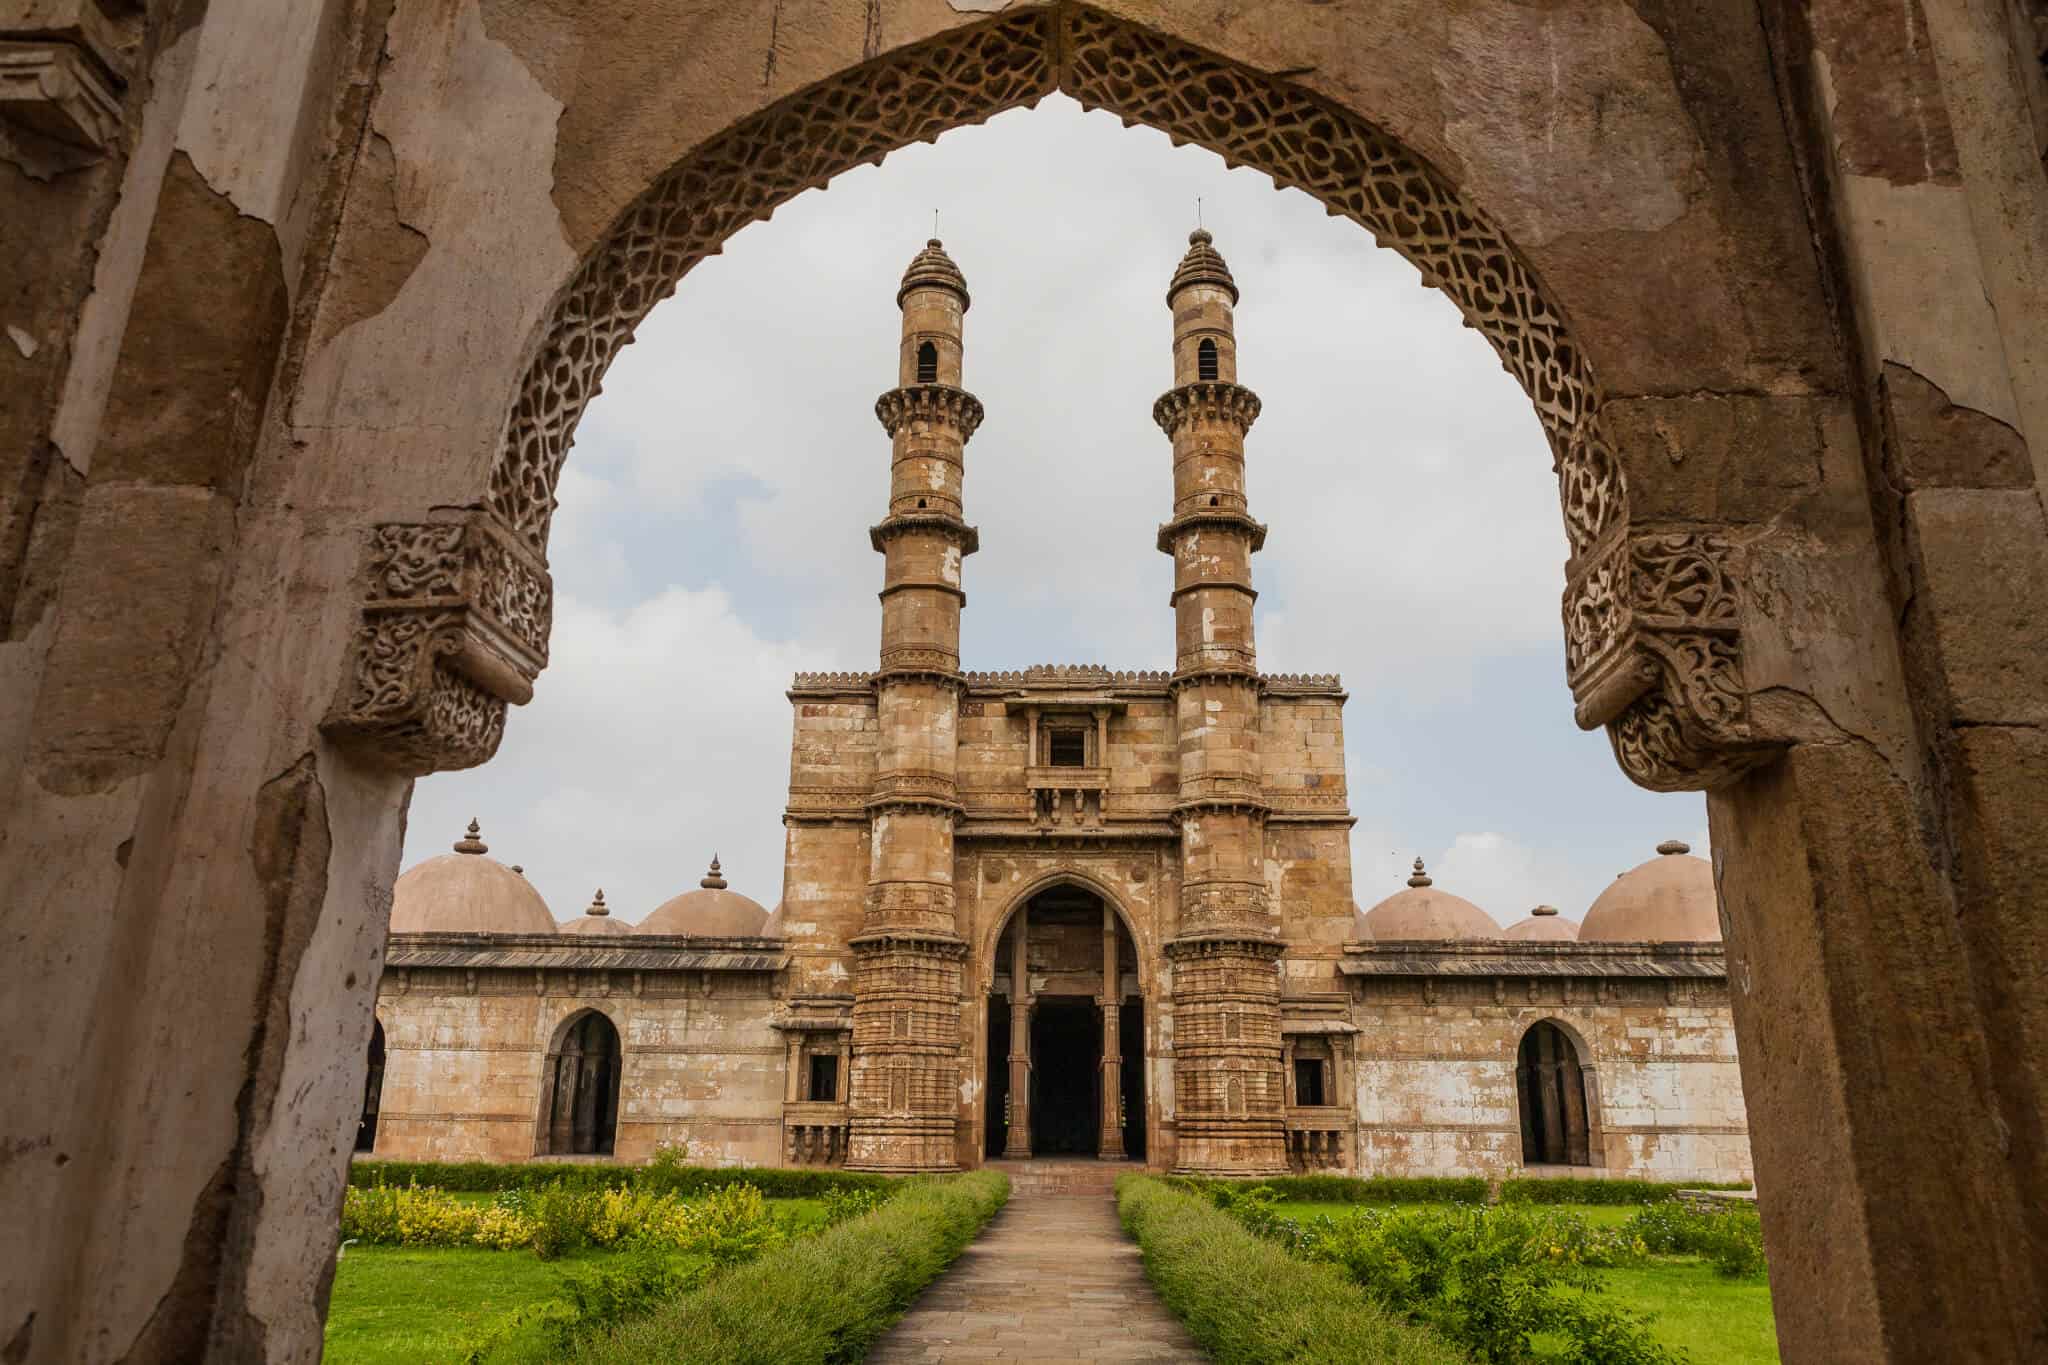 Champaner Pavagadh is a UNESCO World Heritage site of India